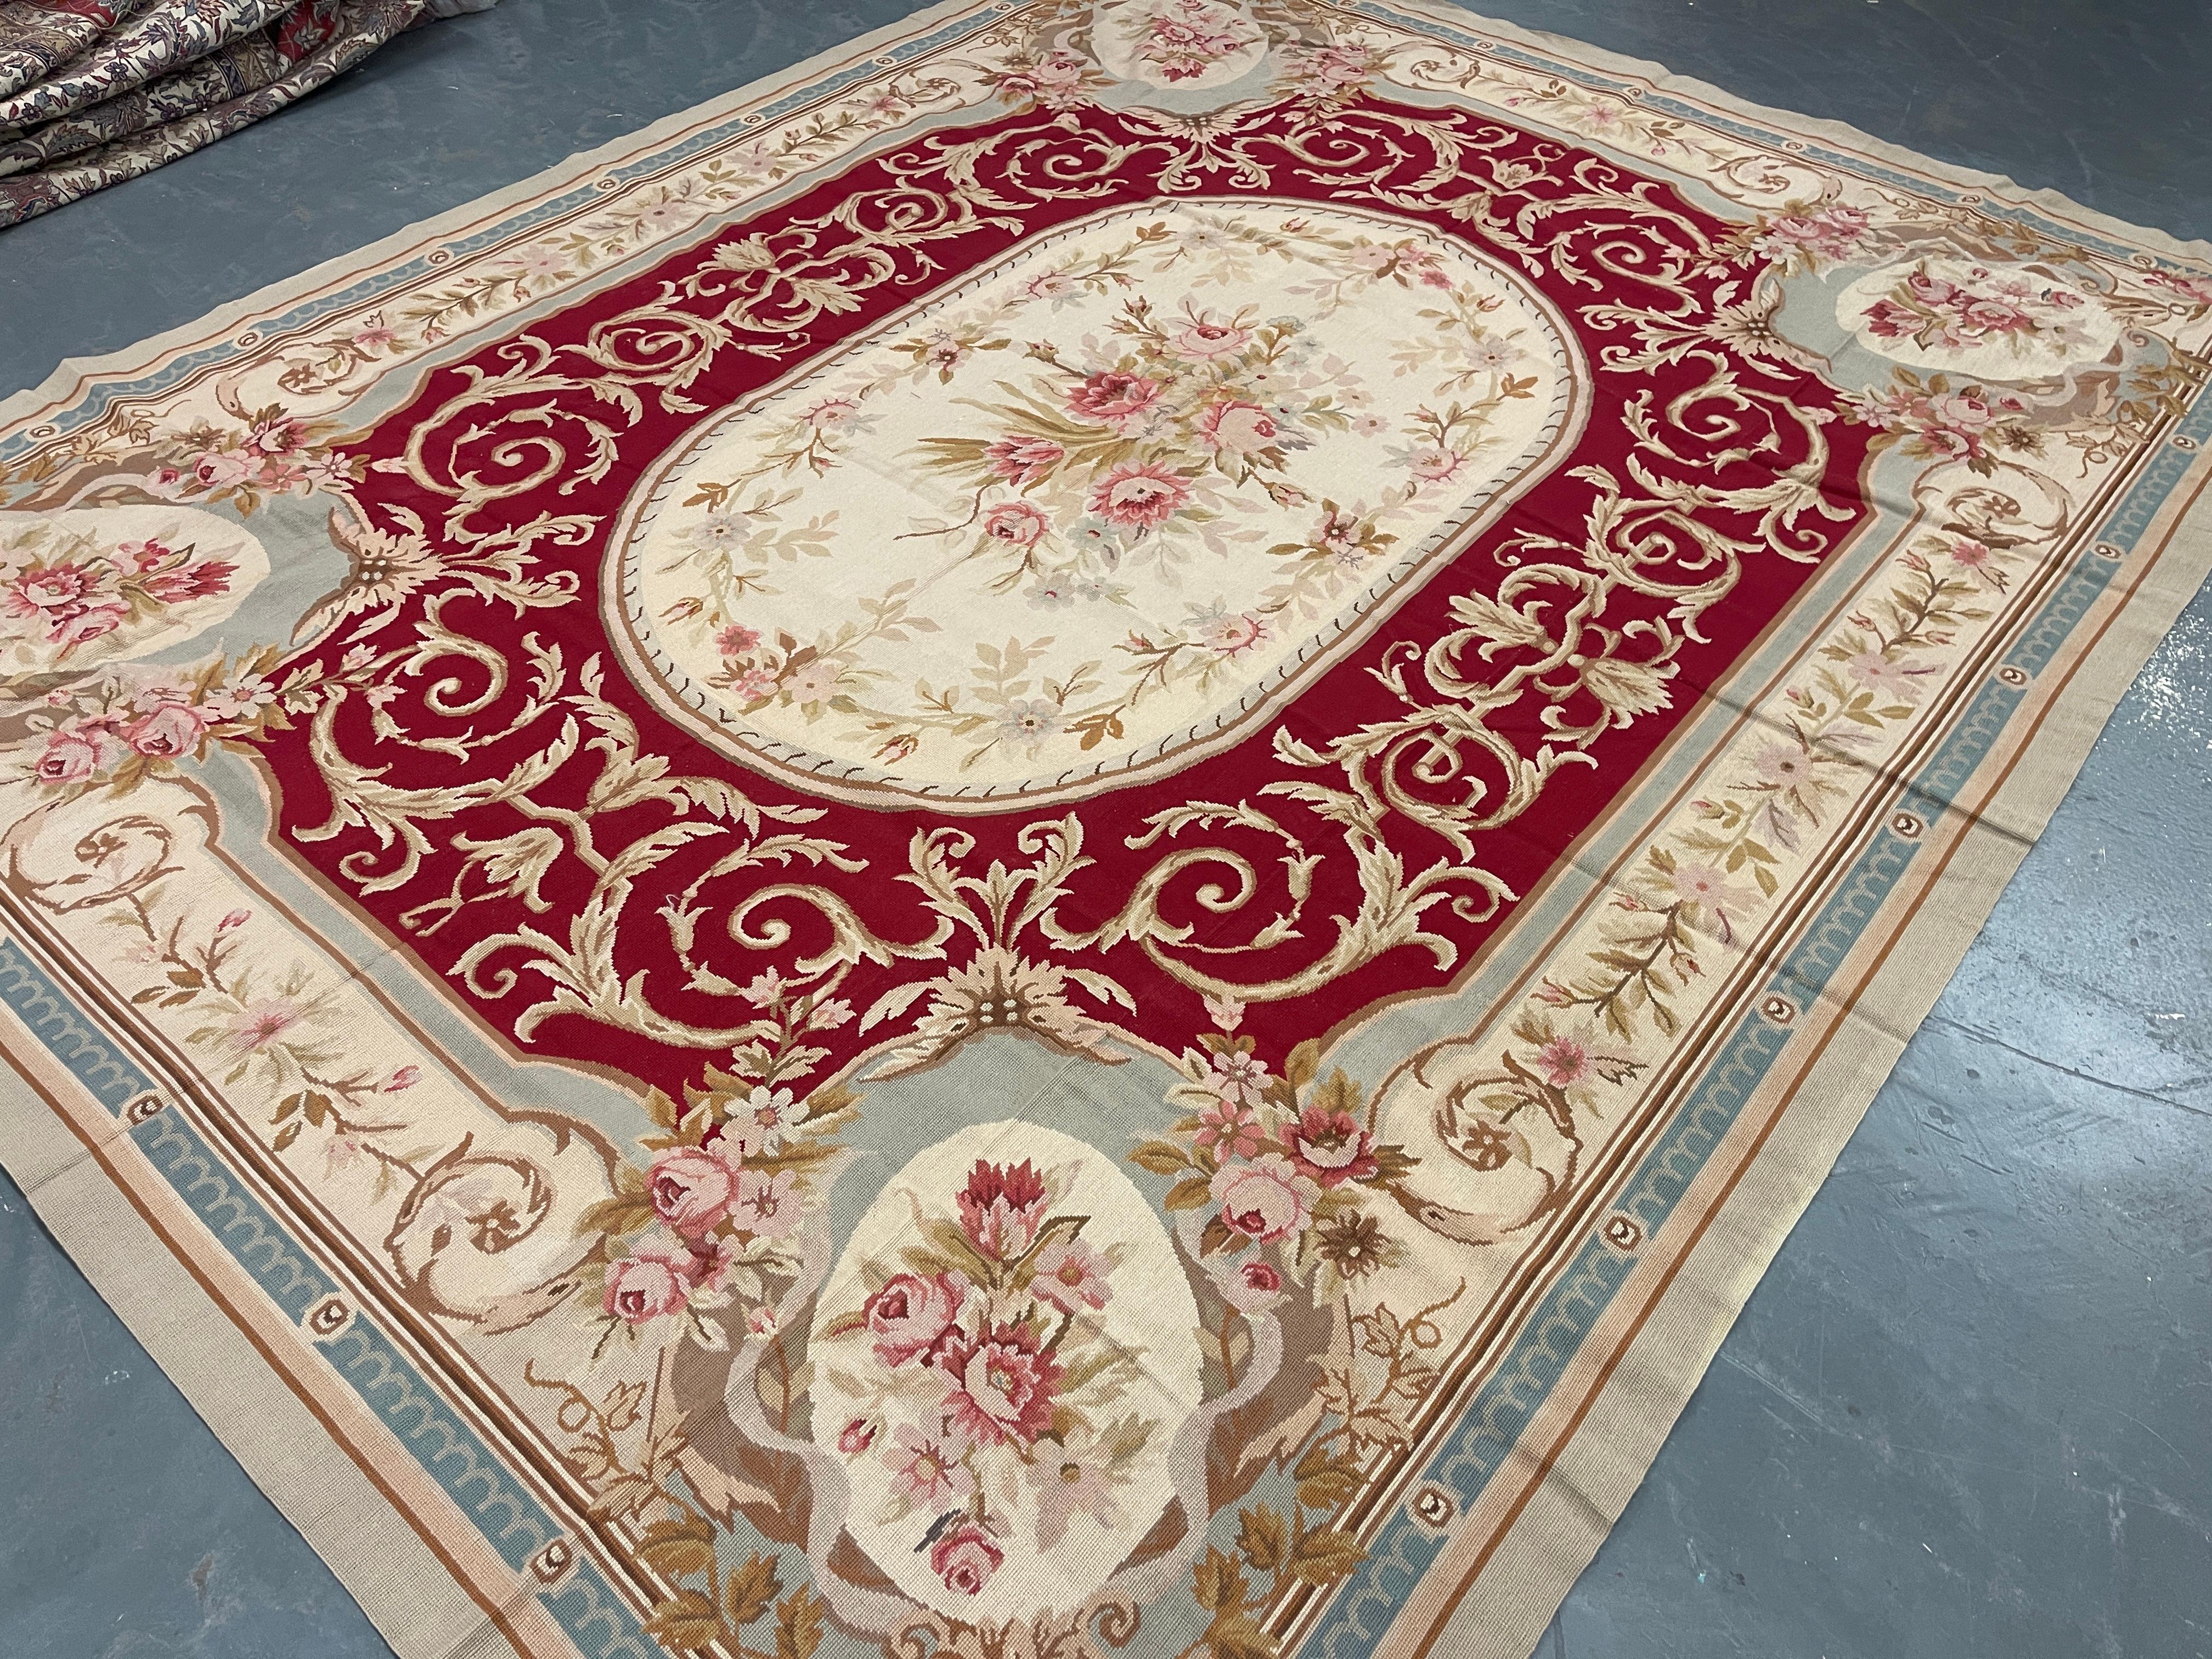 This fantastic area rug has been handwoven with a beautiful symmetrical floral design woven on an ivory red background with cream green and ivory accents. This elegant piece's colour and design make it the perfect accent rug.
This style of rugs is